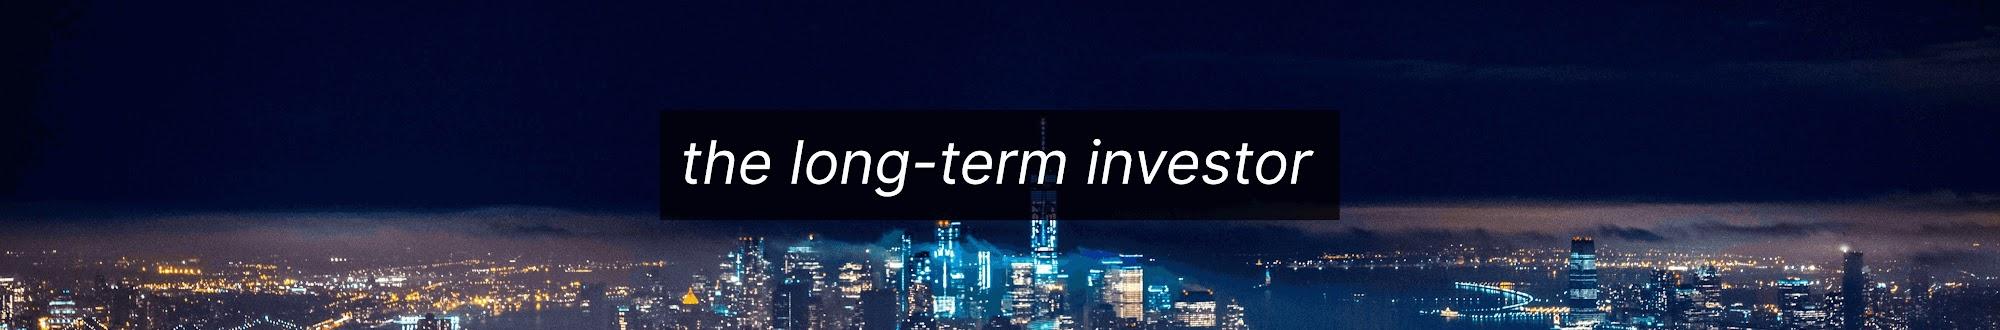 The Long-Term Investor